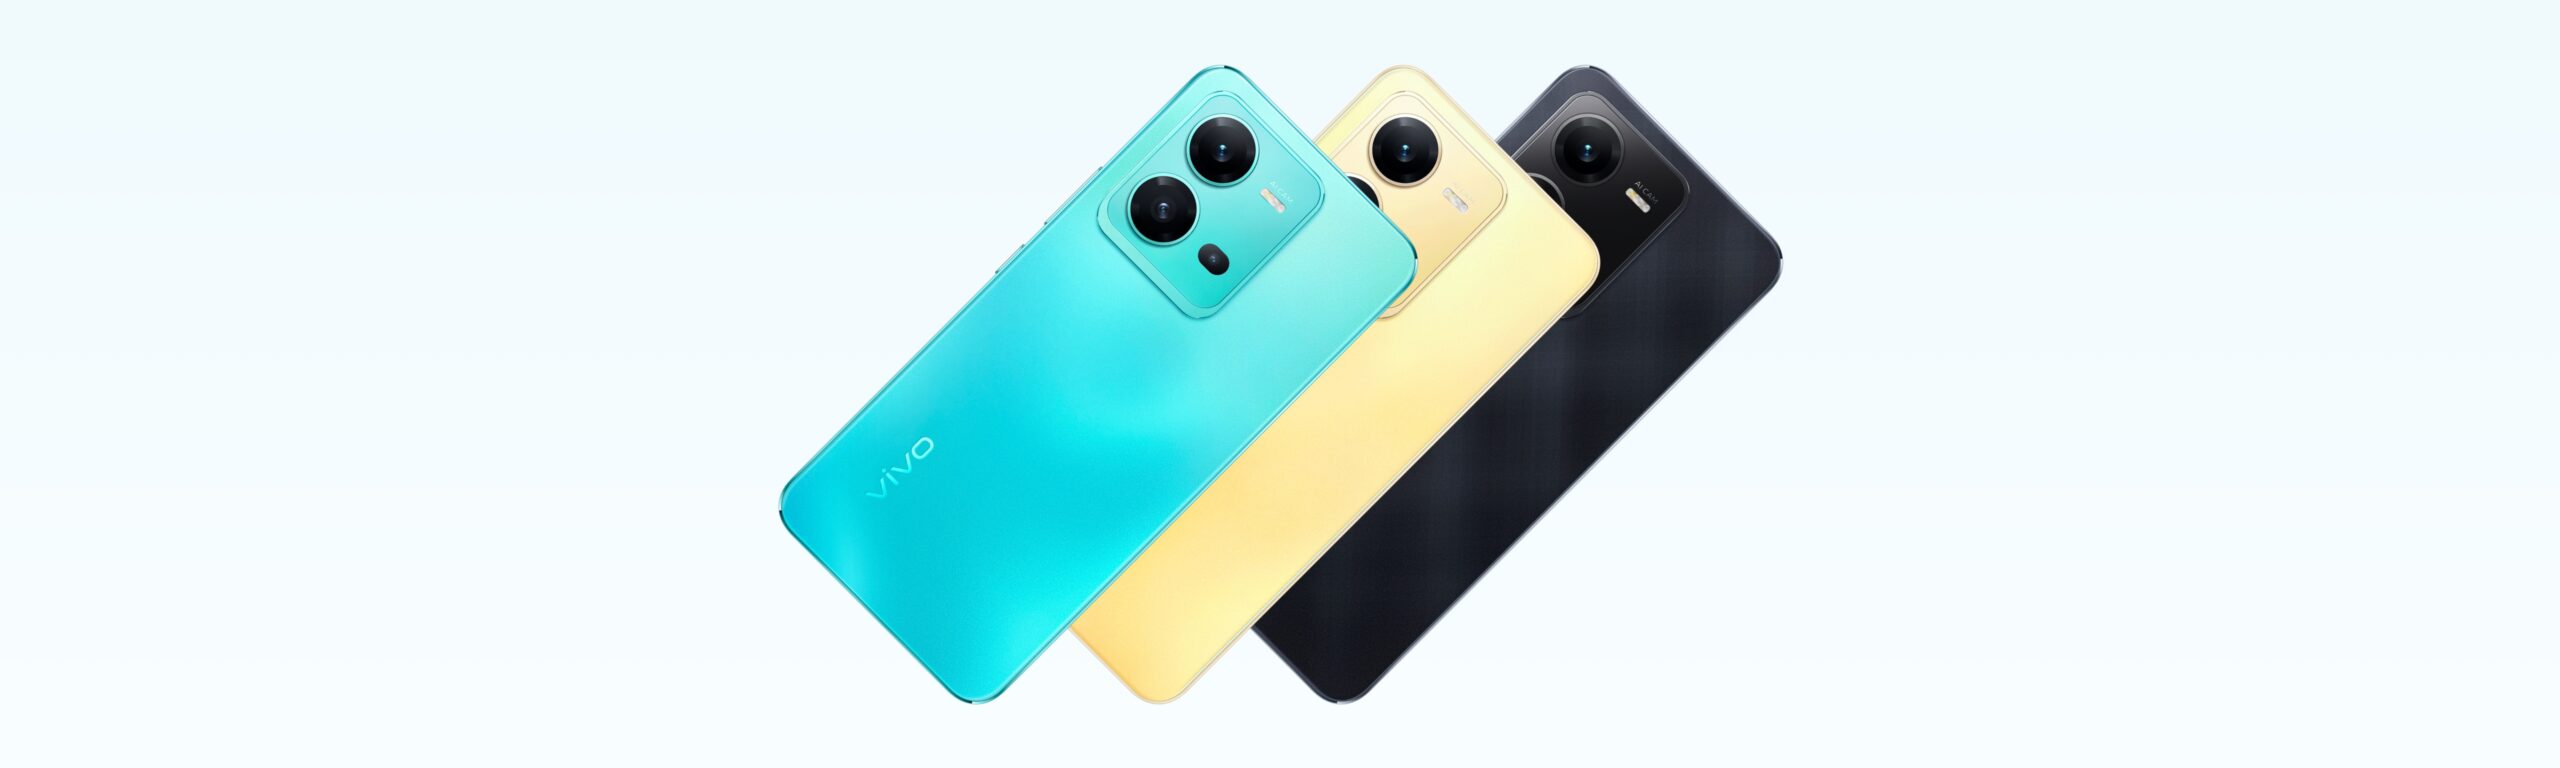 Vivo V25 5G Pro smartphone in various colors